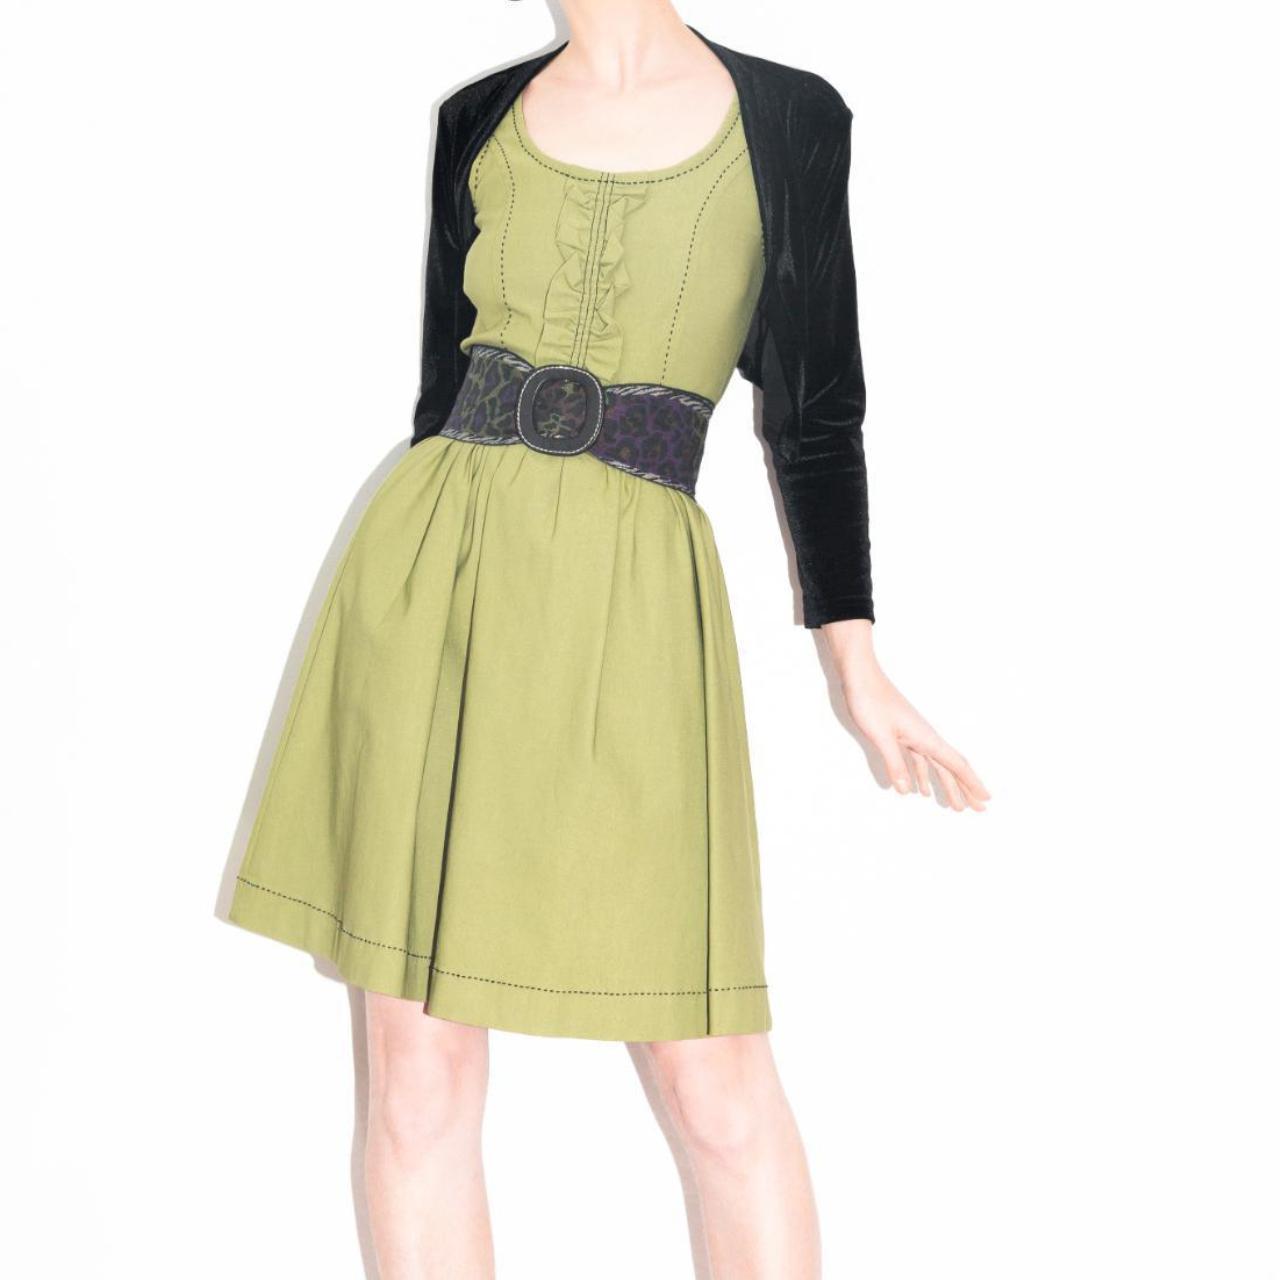 Product Image 1 - Adorable olive/army green fit and